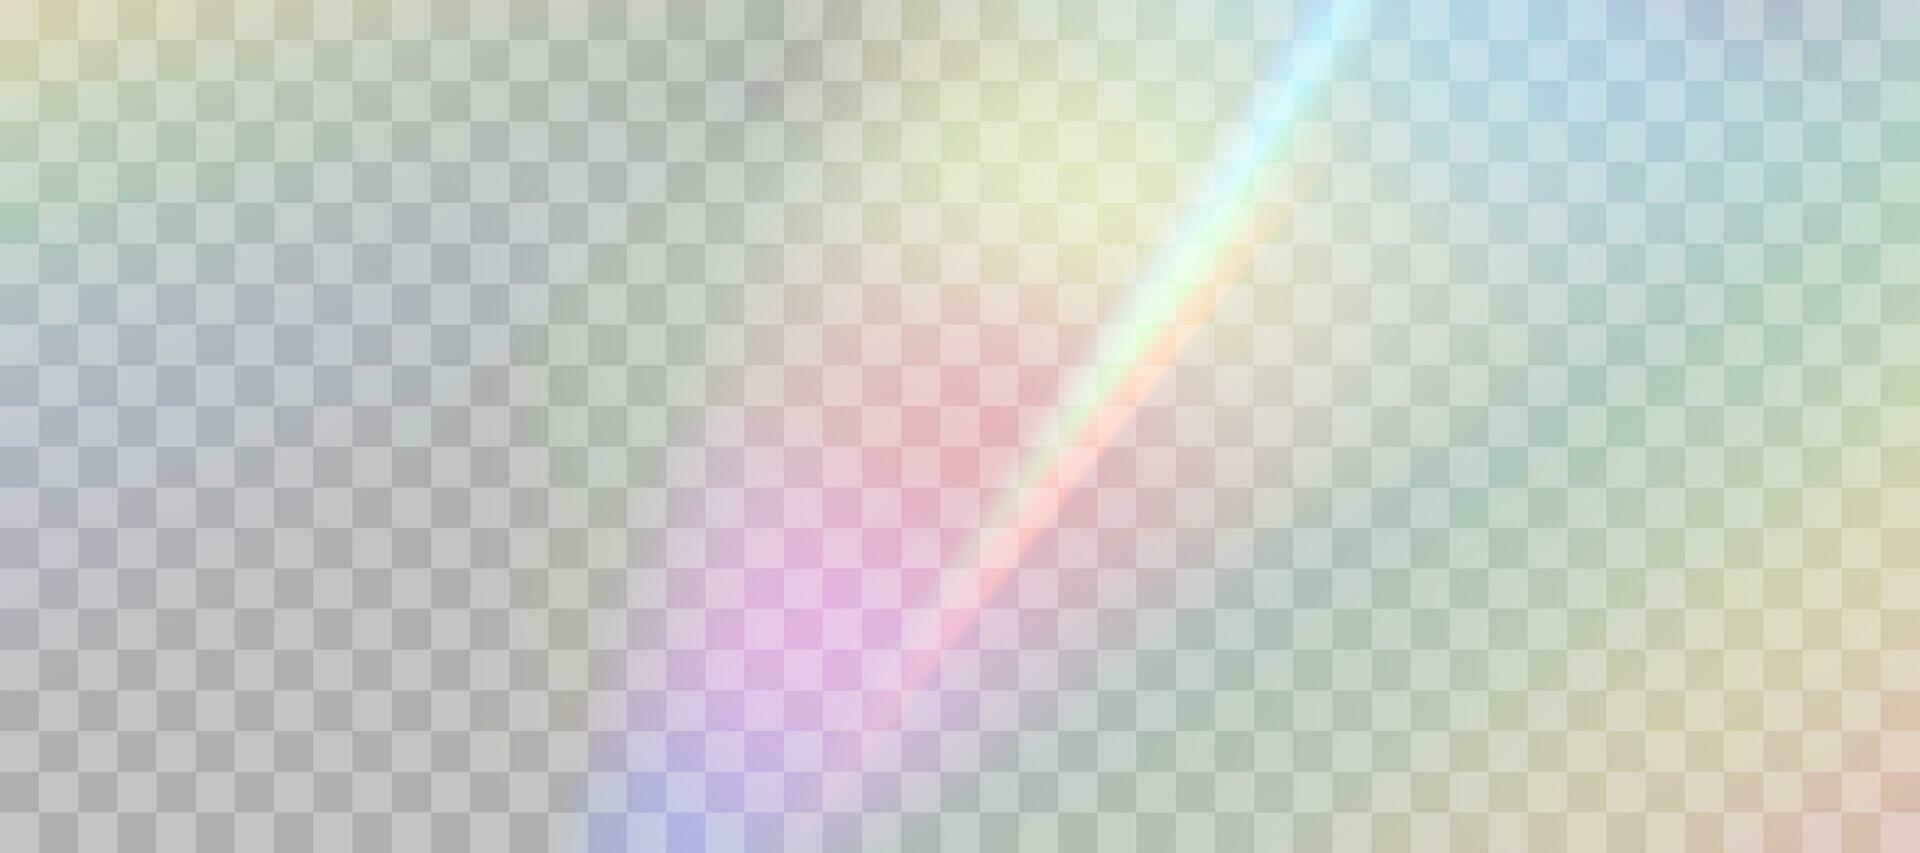 Blurred rainbow refraction overlay effect. Light lens prism effect. Holographic reflection, crystal flare leak shadow overlay. Vector abstract illustration.